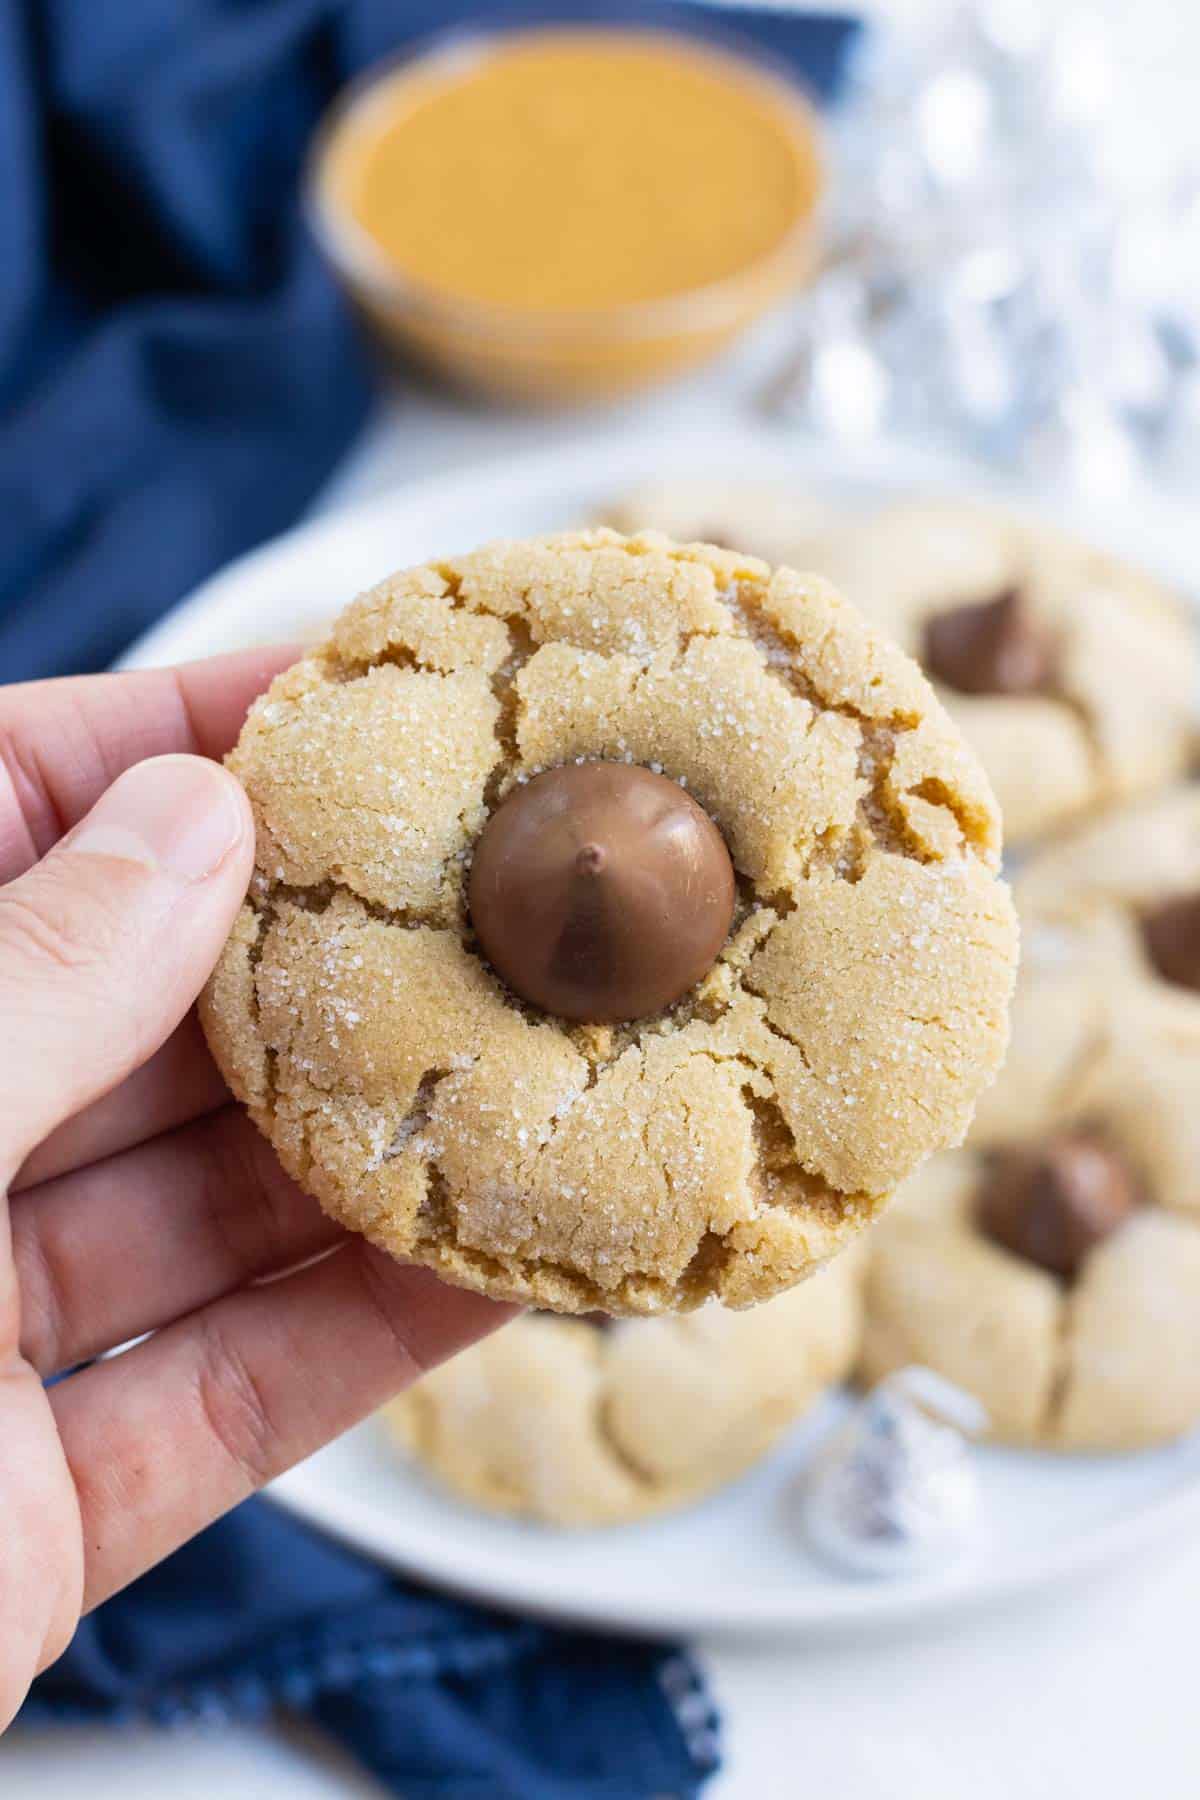 A hand holds a crackly peanut butter blossom cookie.